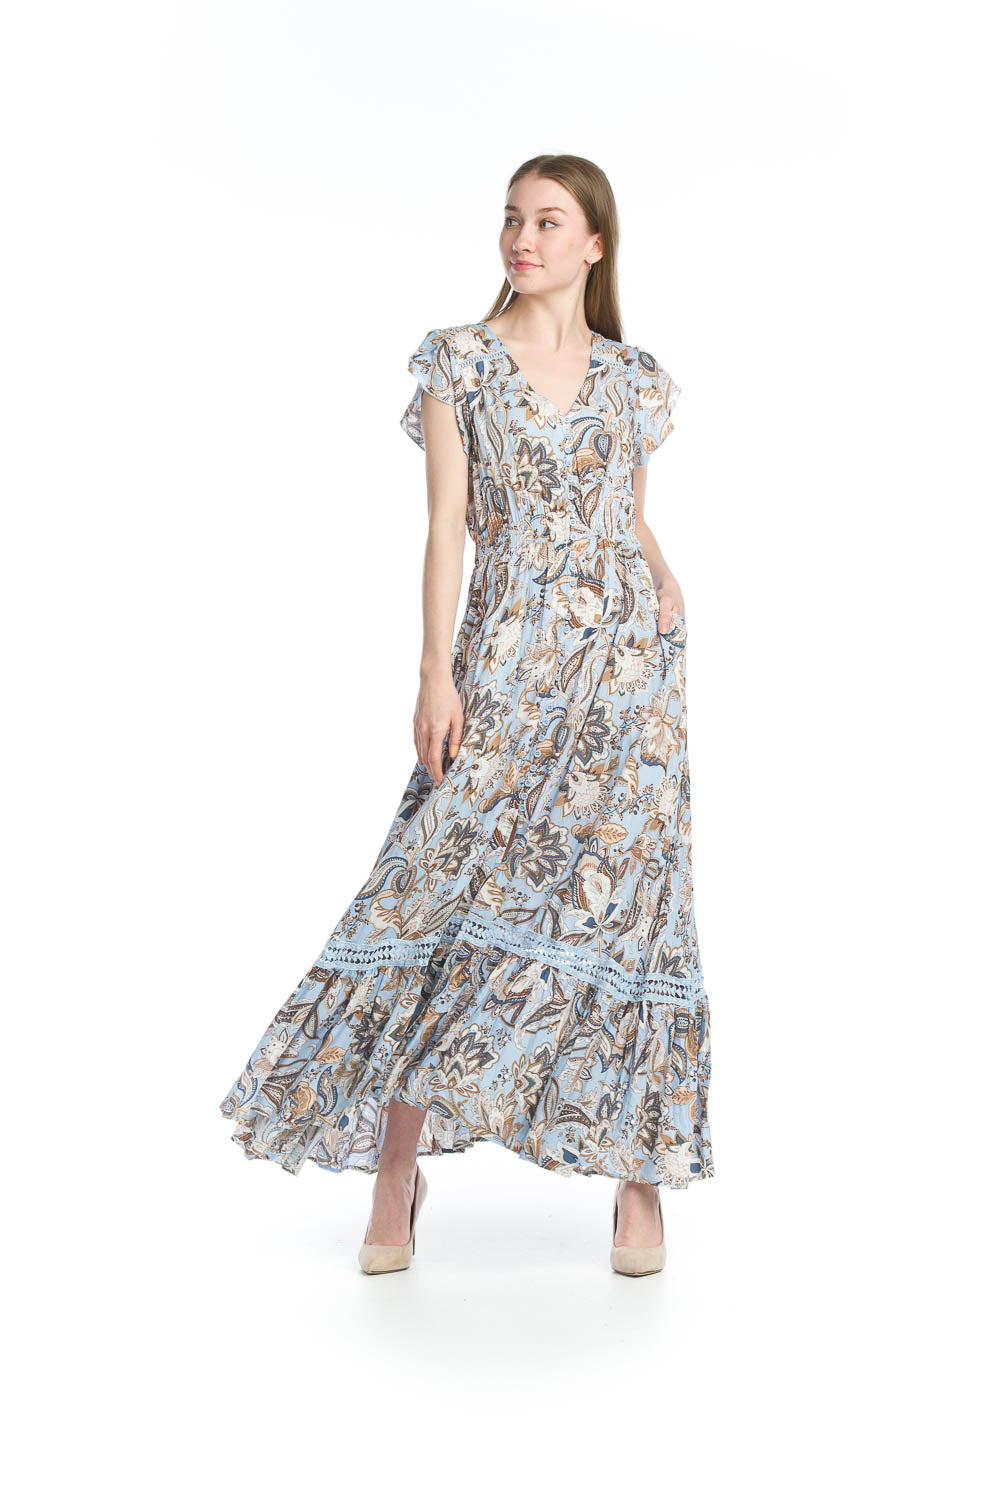 PD-14512 - FLORAL BUTTON FRONTMAXI DRESS WITH ELASTIC WAIST